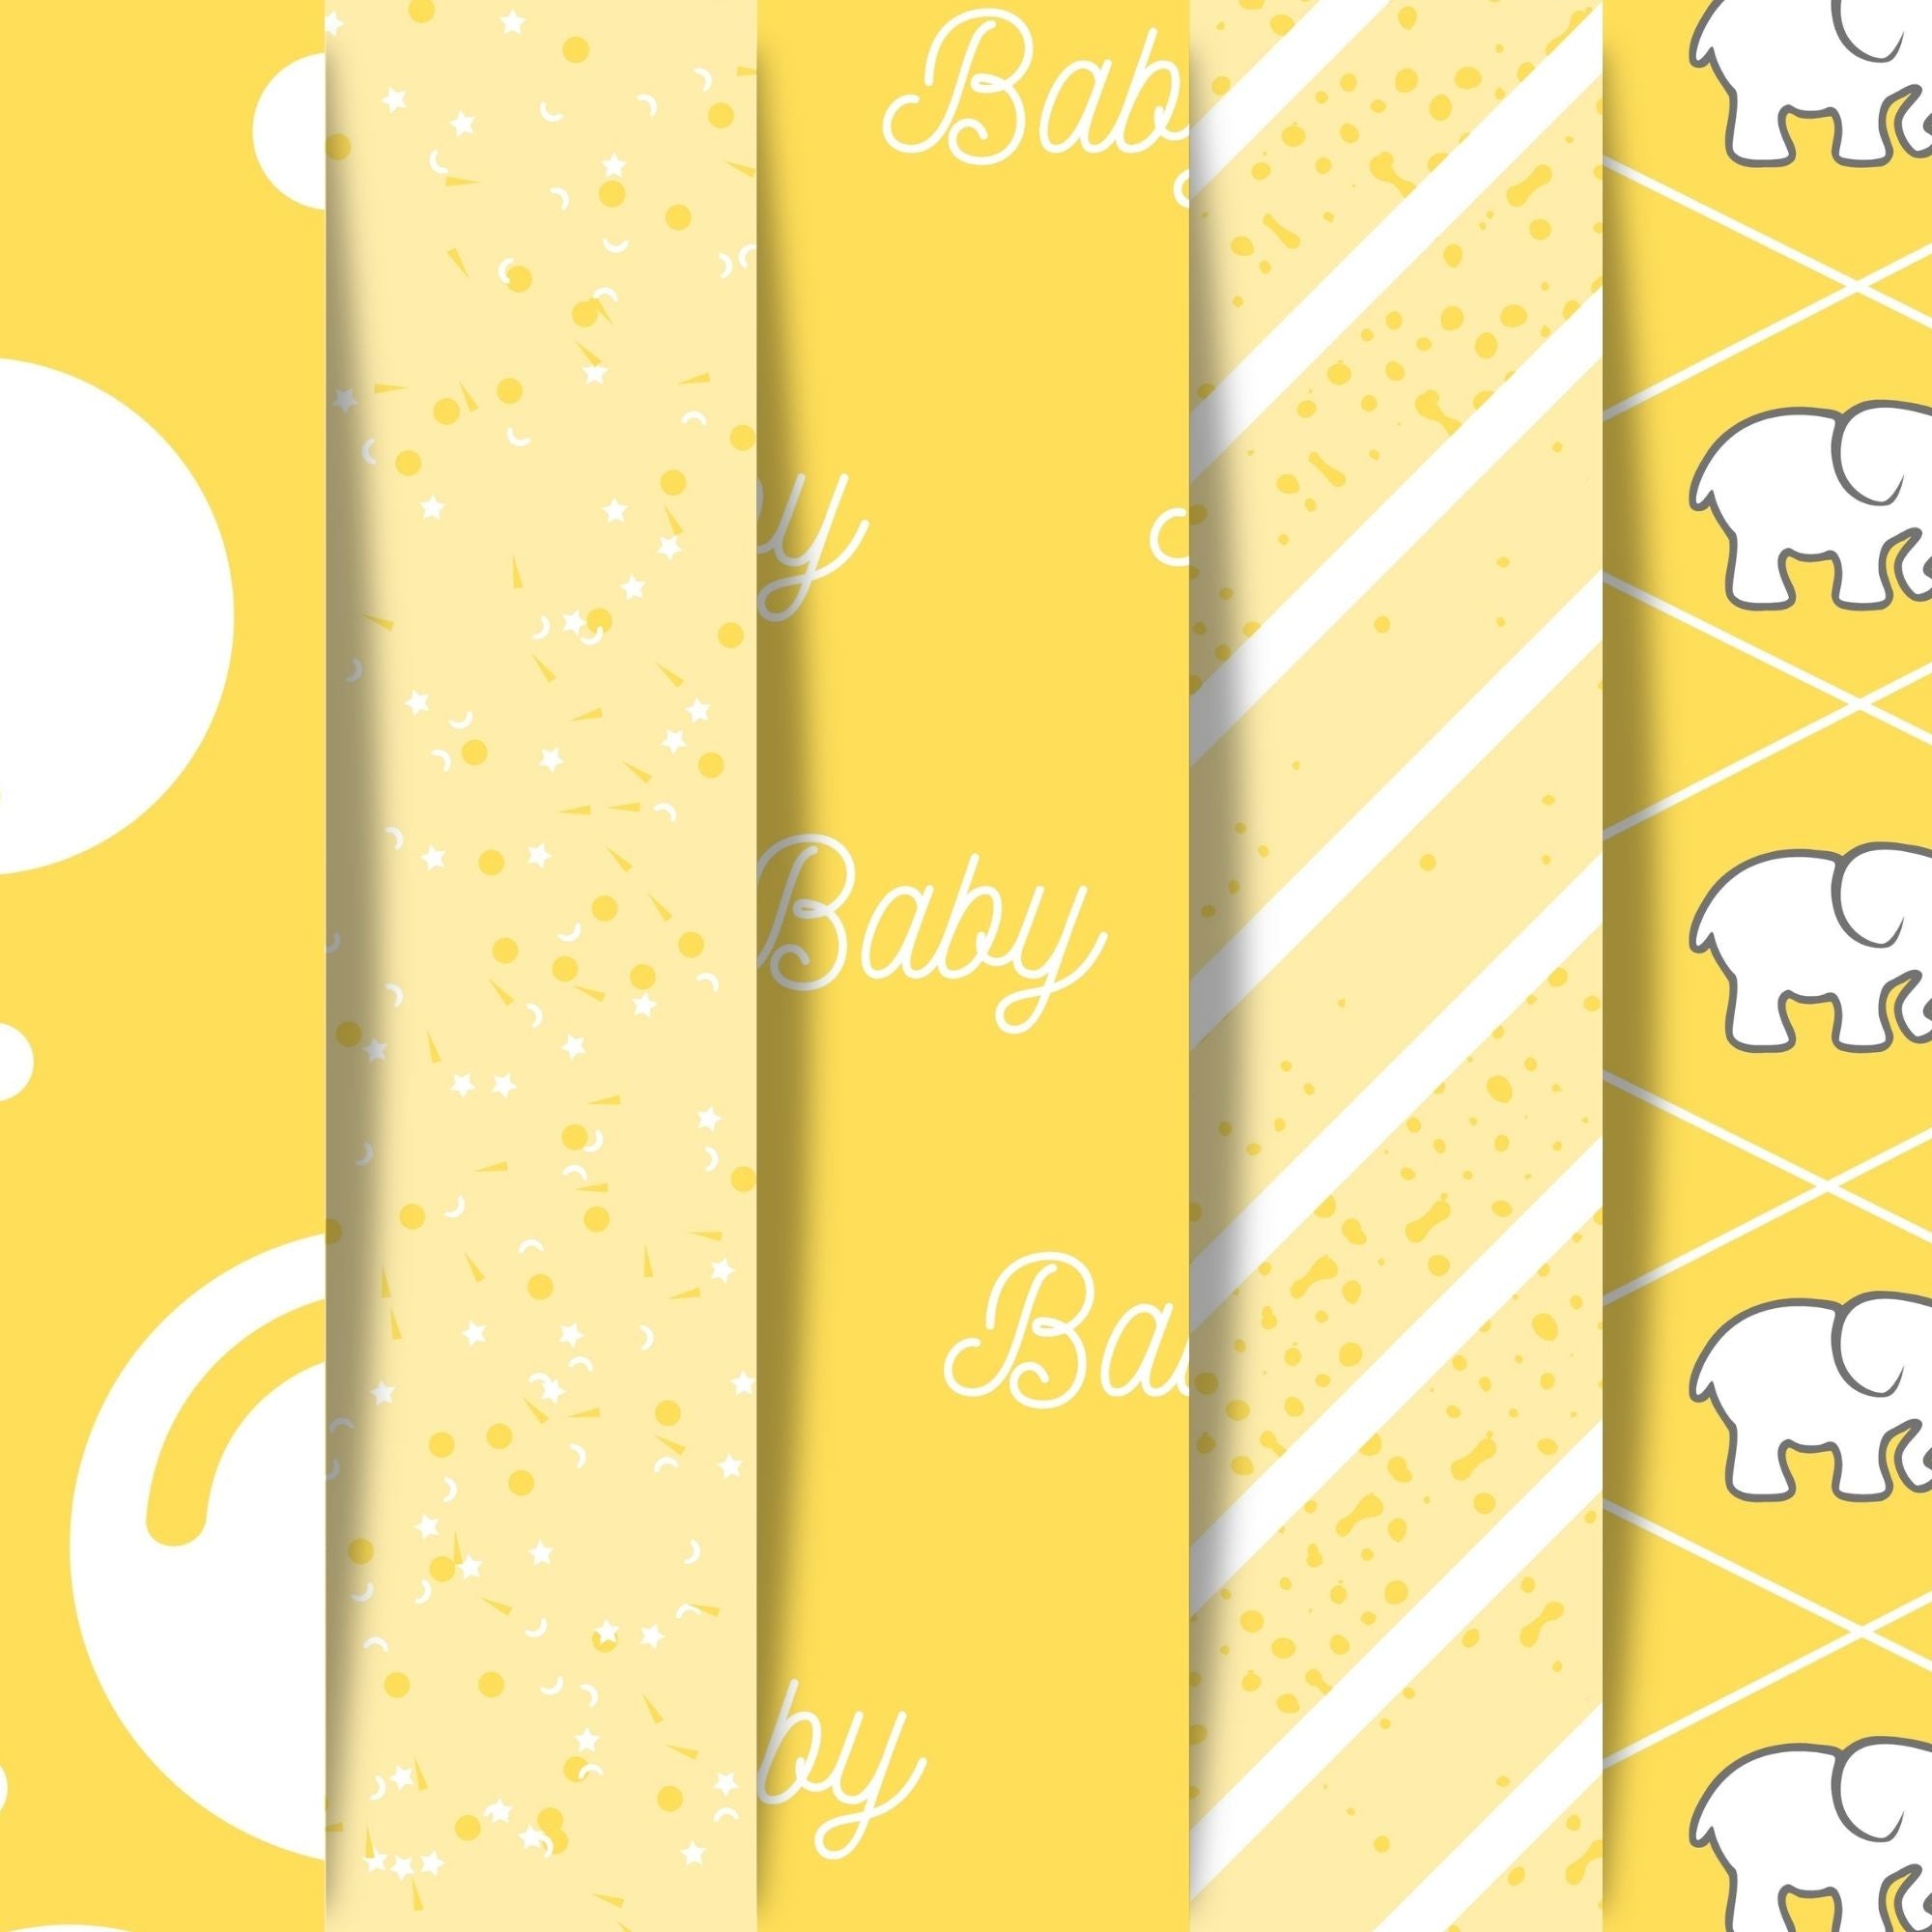 Scrapbookers, this is what you've been looking for! This yellow themed baby bundle has 30 unique images that can be printed or used as digital backgrounds.